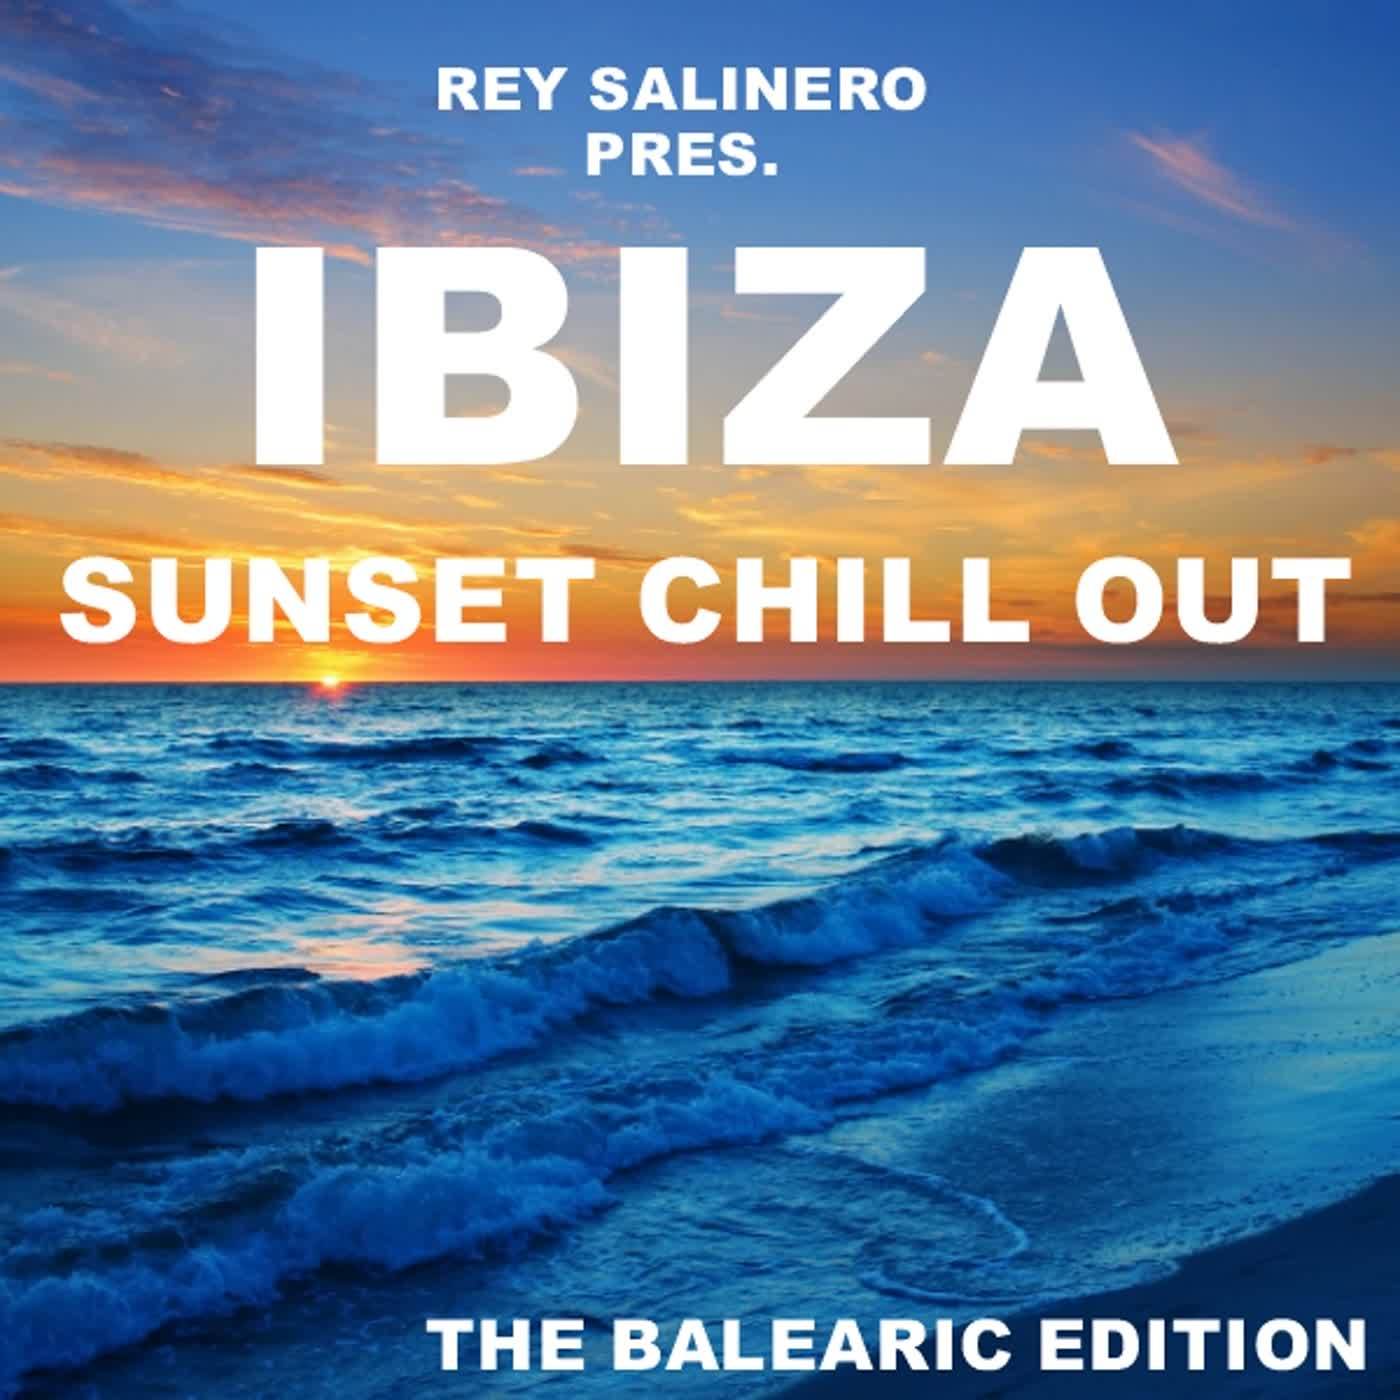 Rey Salinero pres. - Ibiza Sunset Chill Out (The Balearic Edition)